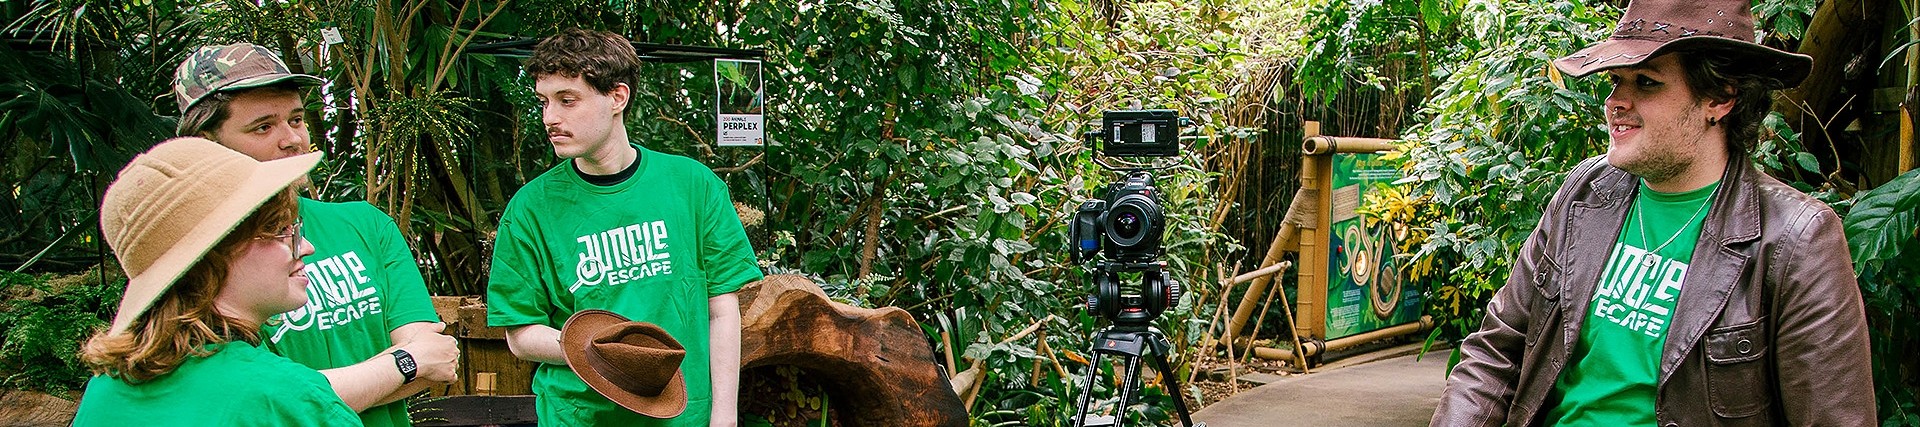 On a path through a tropical glasshouse, a camera stands on a tripod between four young people wearing green Jungle Escape t-shirts.